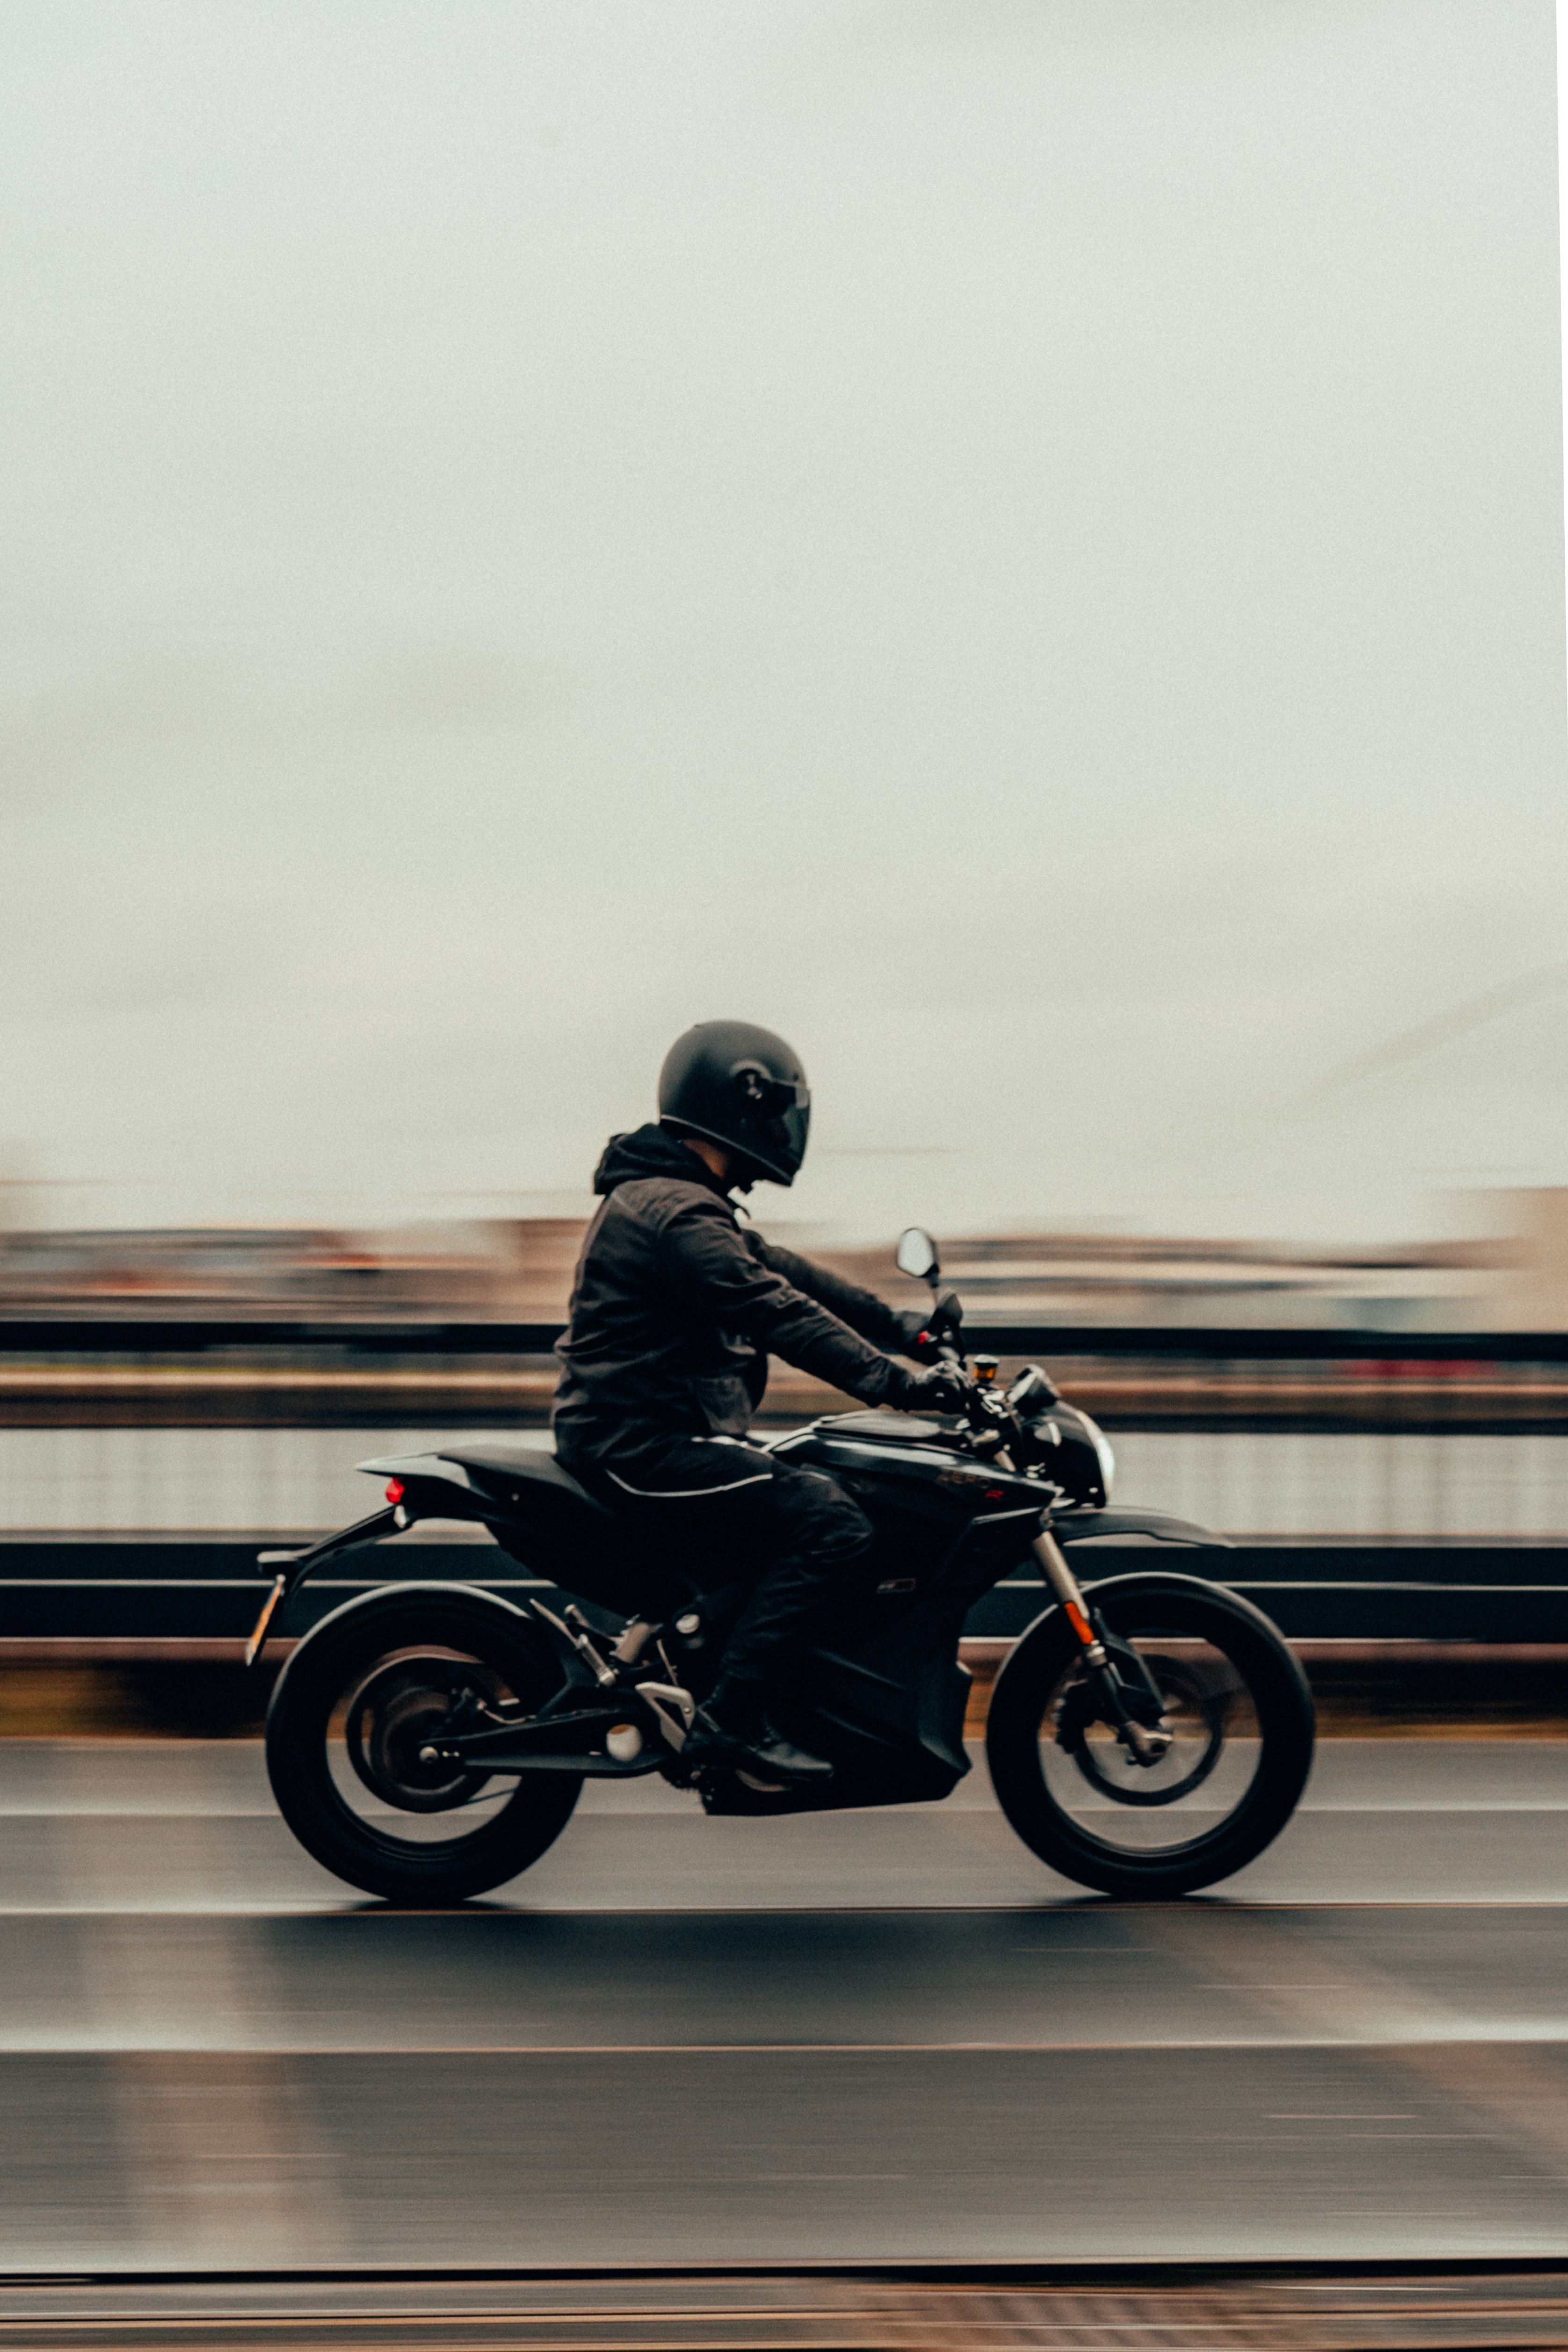 speed, motorcycles, traffic, movement, motorcyclist, motorcycle, race images